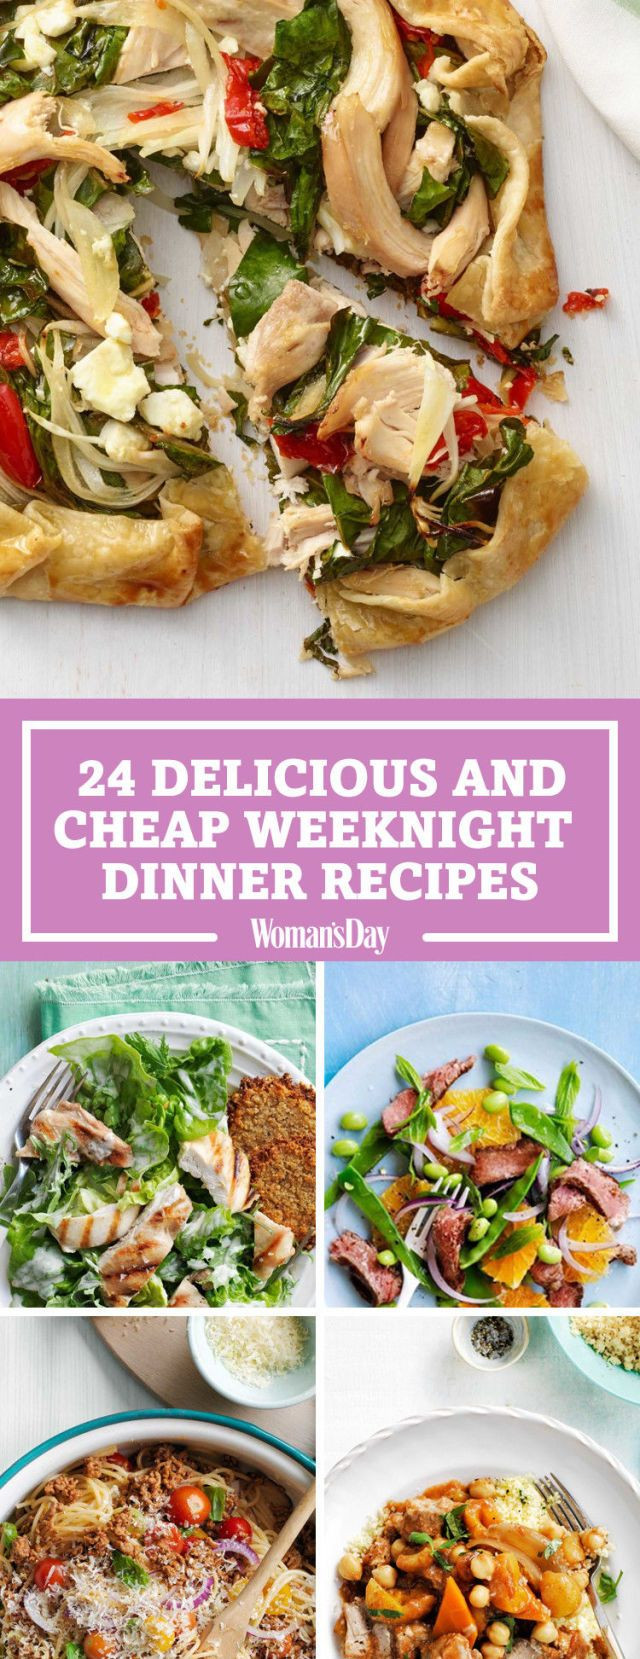 Inexpensive Dinner Ideas
 100 Cheap Dinner Ideas – Easy Recipes for Inexpensive Meals